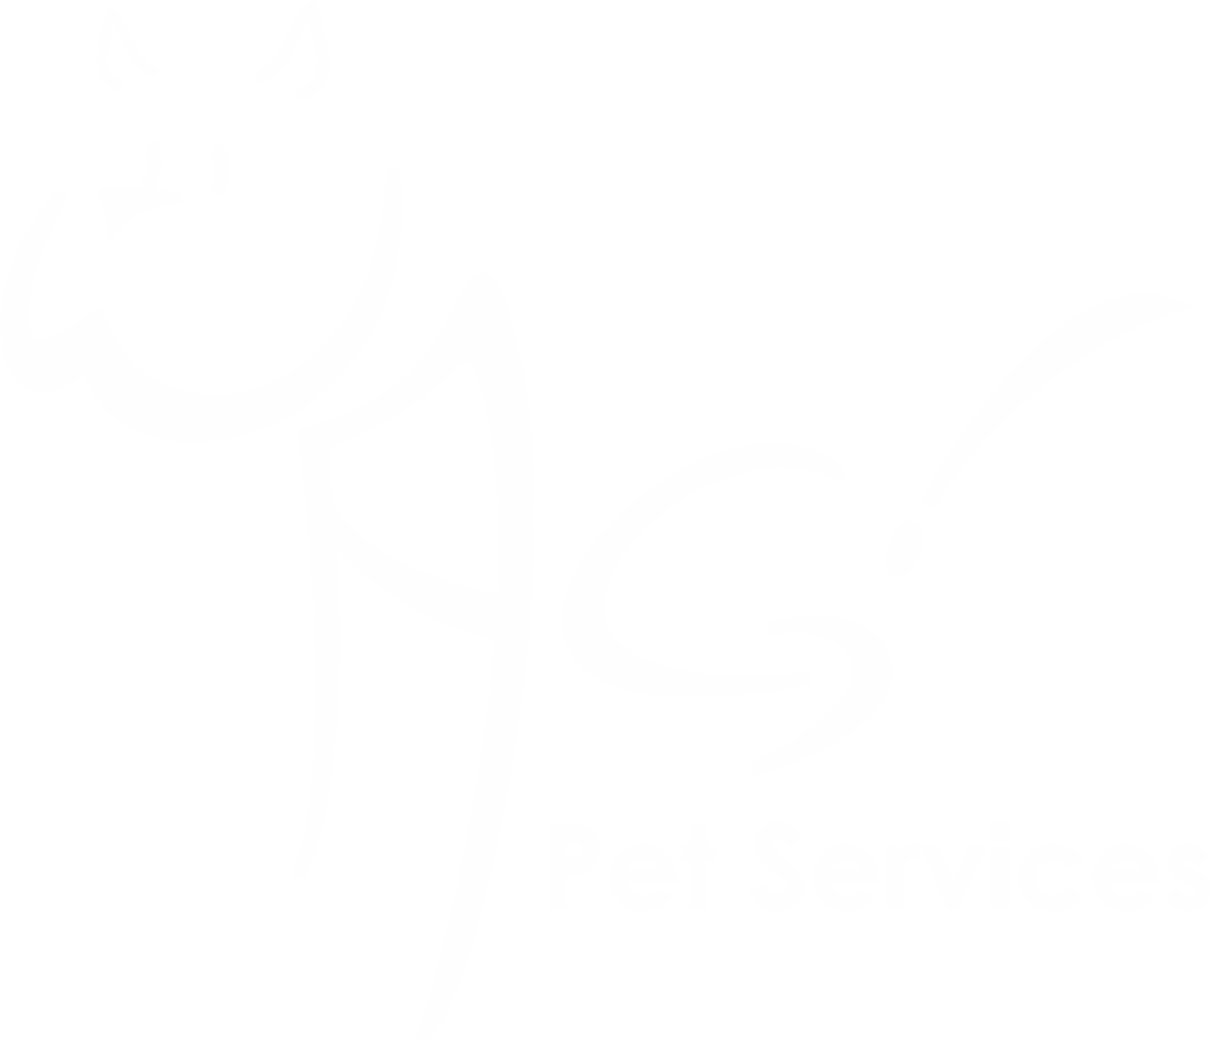 Wag Pet Services - Wag Black And White, Transparent background PNG HD thumbnail